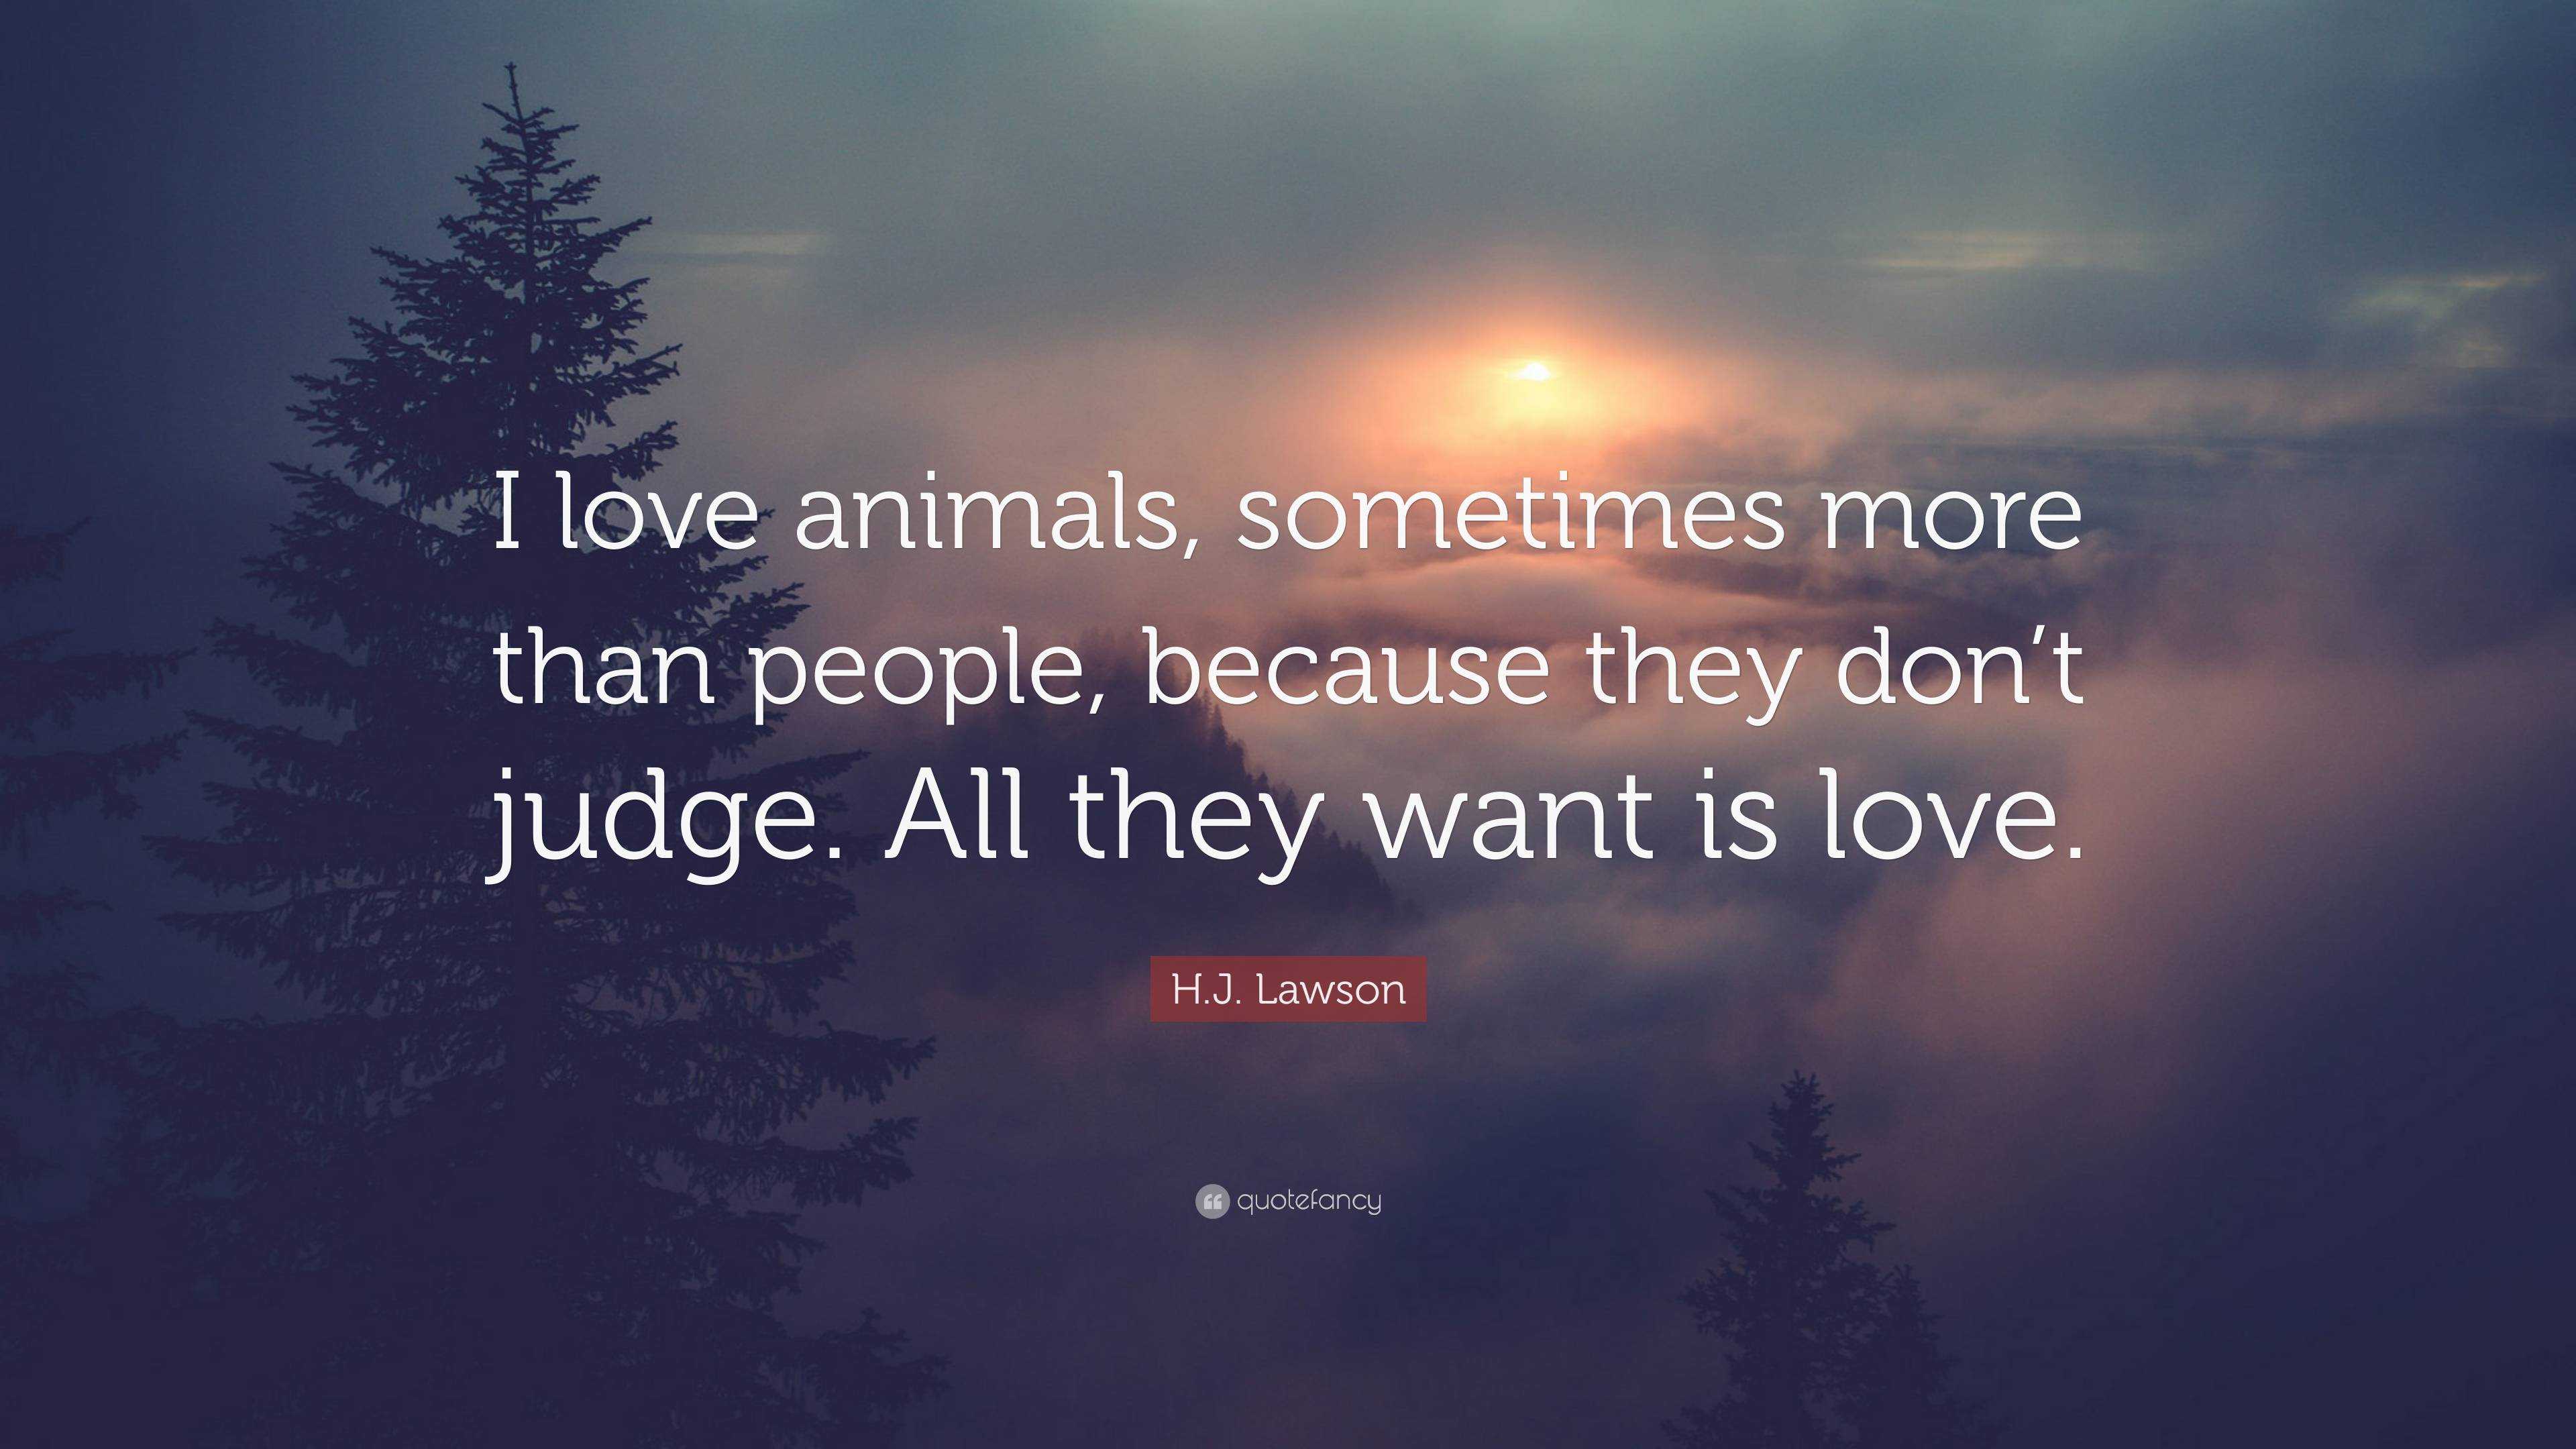 . Lawson Quote: “I love animals, sometimes more than people, because  they don't judge. All